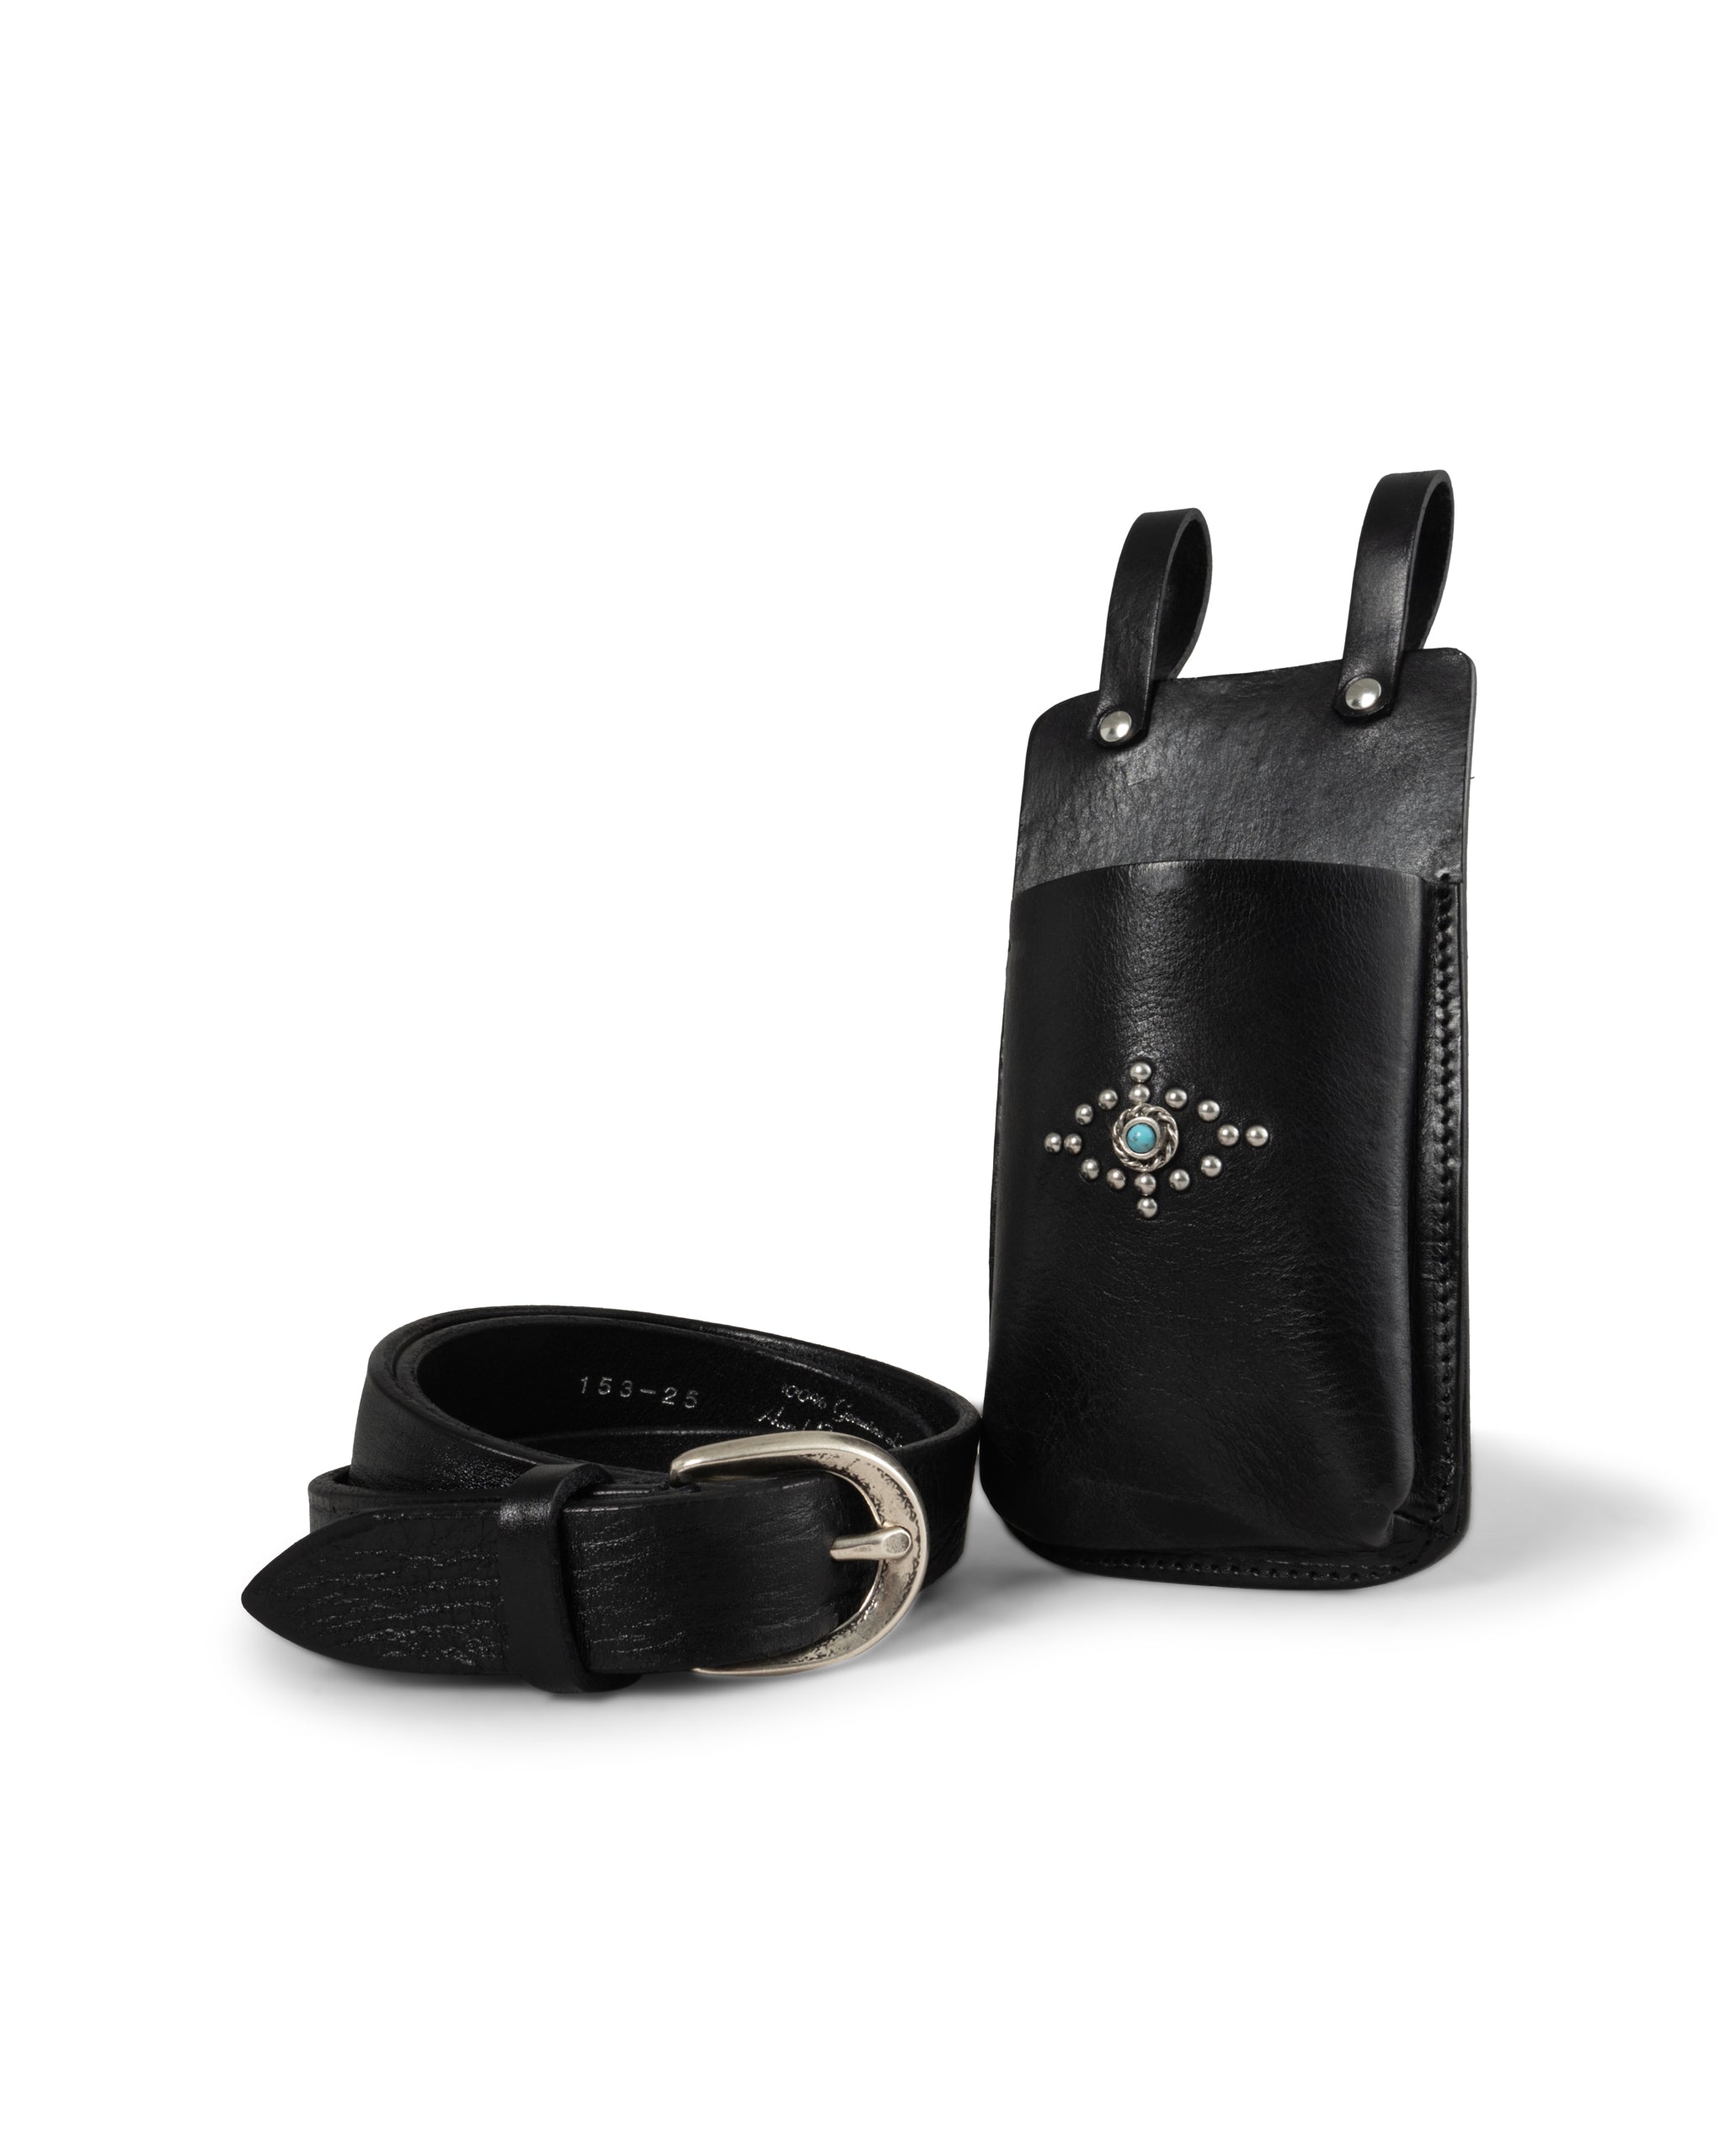 NAPPA BELT WITH MOBILE PHONE POCKET